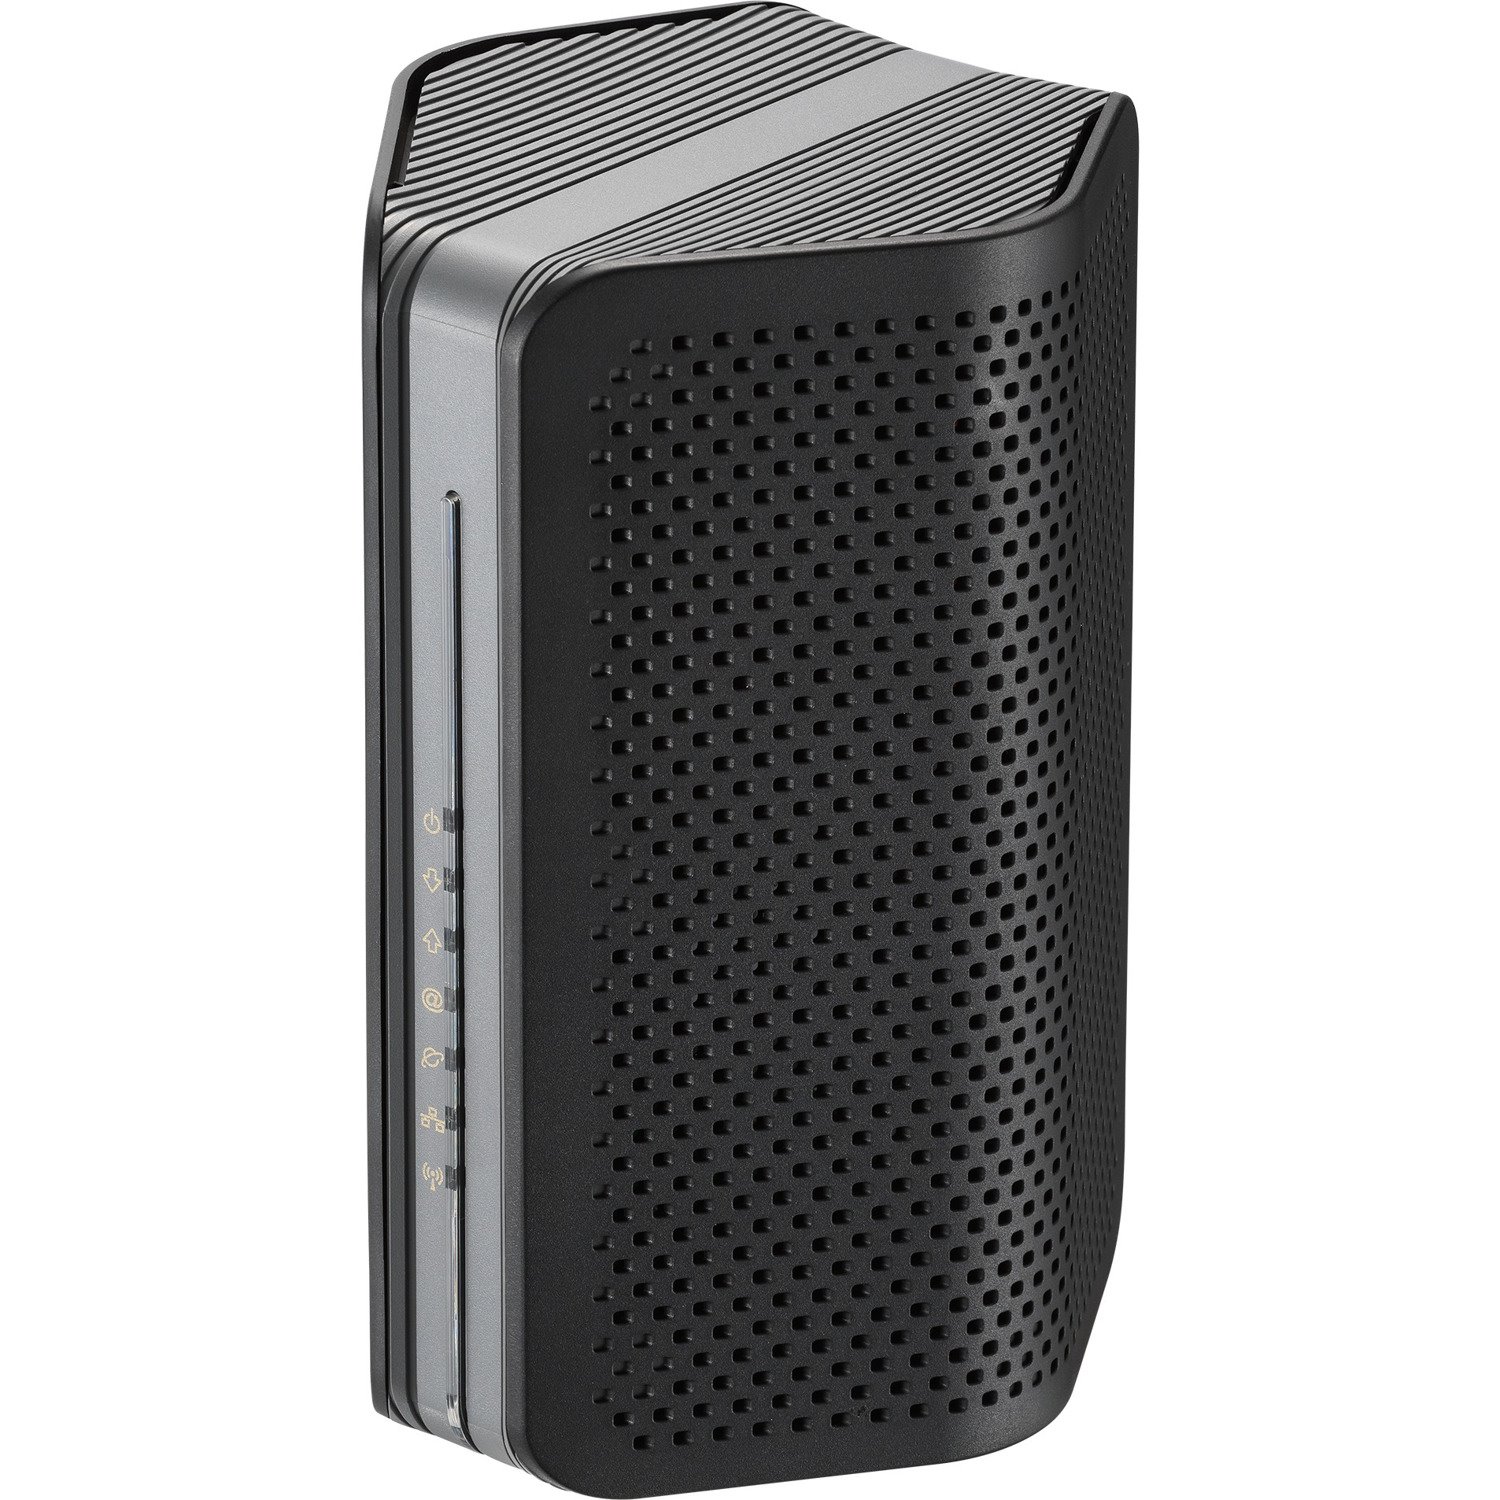 Asus CMAX6000 Wi-Fi 6 IEEE 802.11ax Ethernet, Cable Modem/Wireless Router